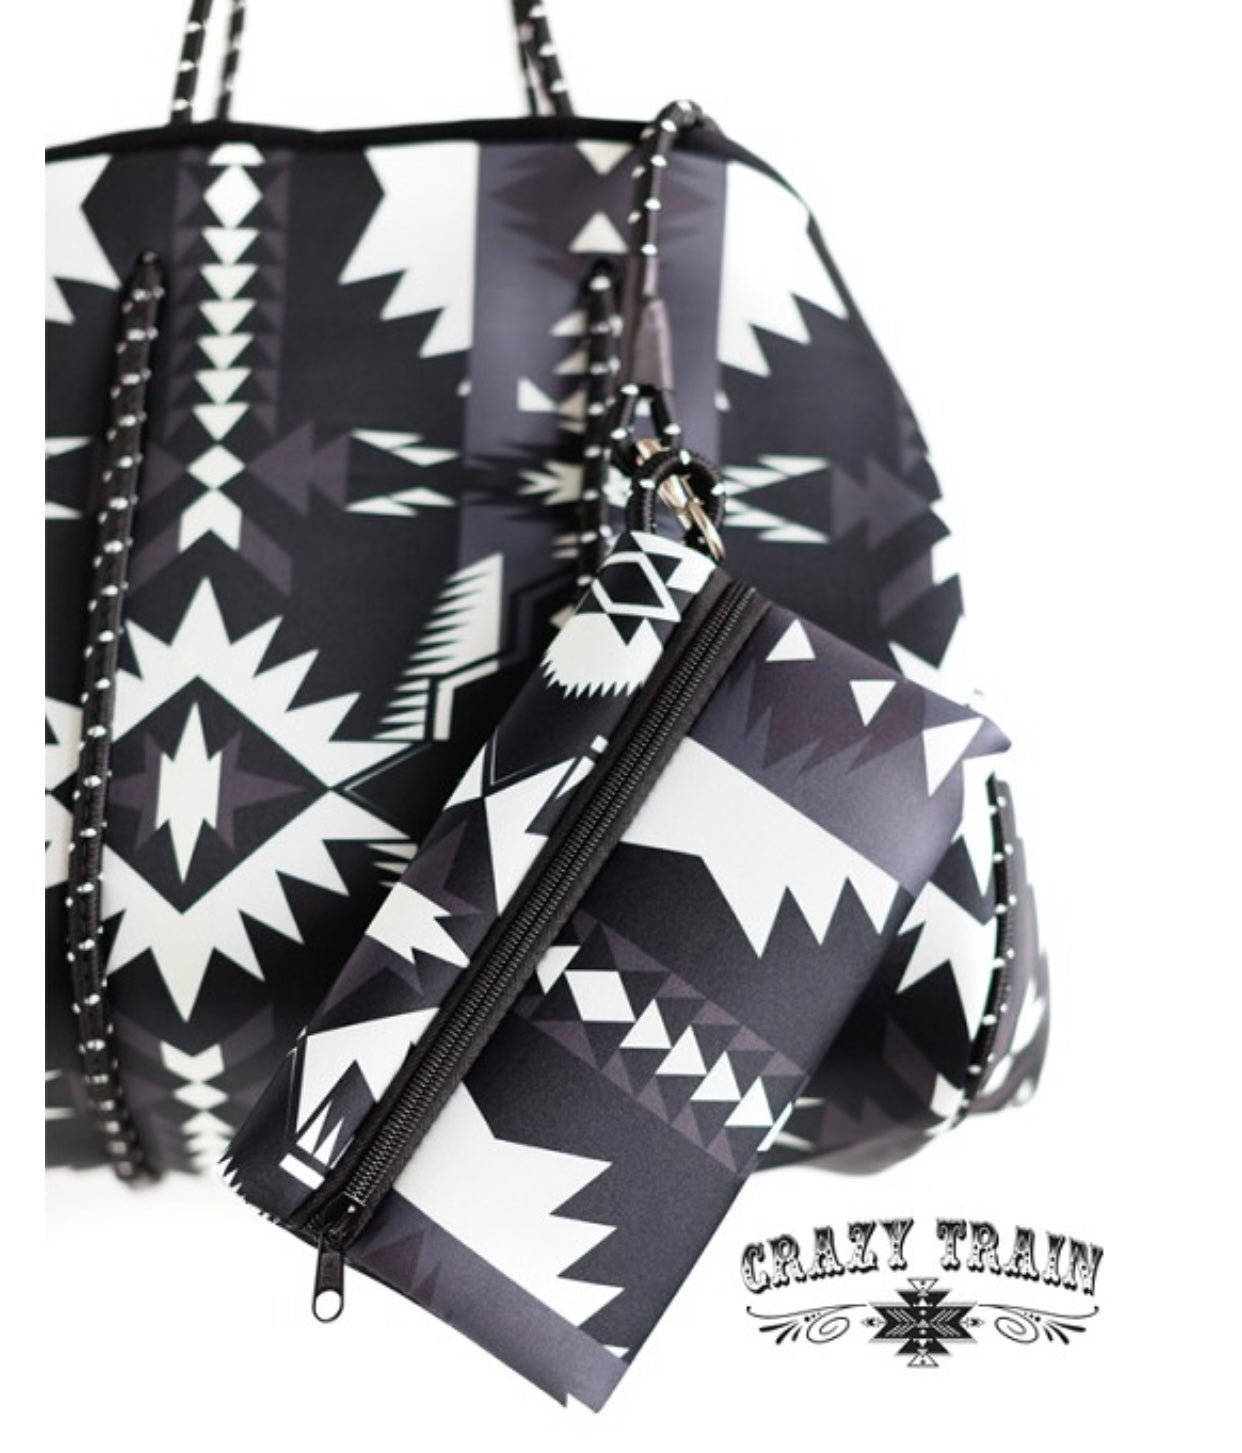 Aztec Neoprene Tote - Multi Color/Black and White - CountryFide Custom Accessories and Outdoors